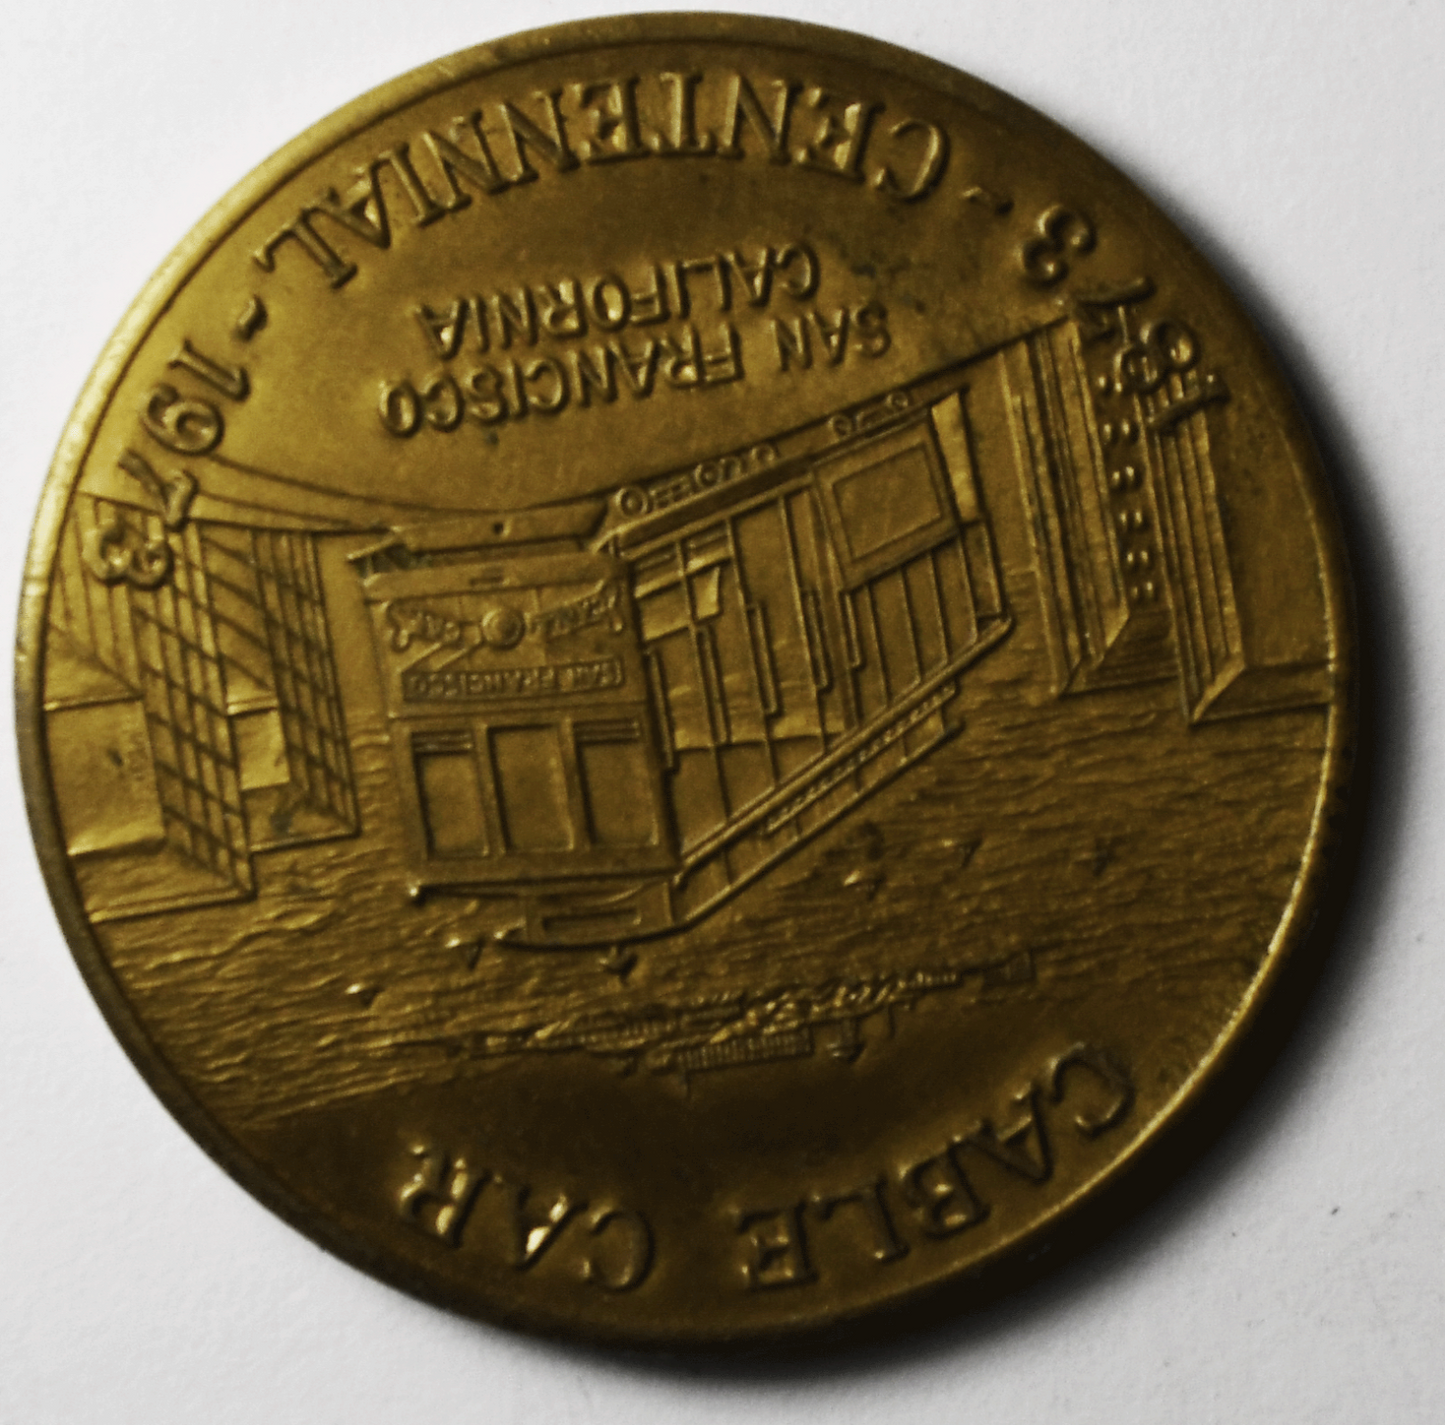 Andrew S Hallidie Father of Cable Car San Francisco CA Centennial Medal 38mm